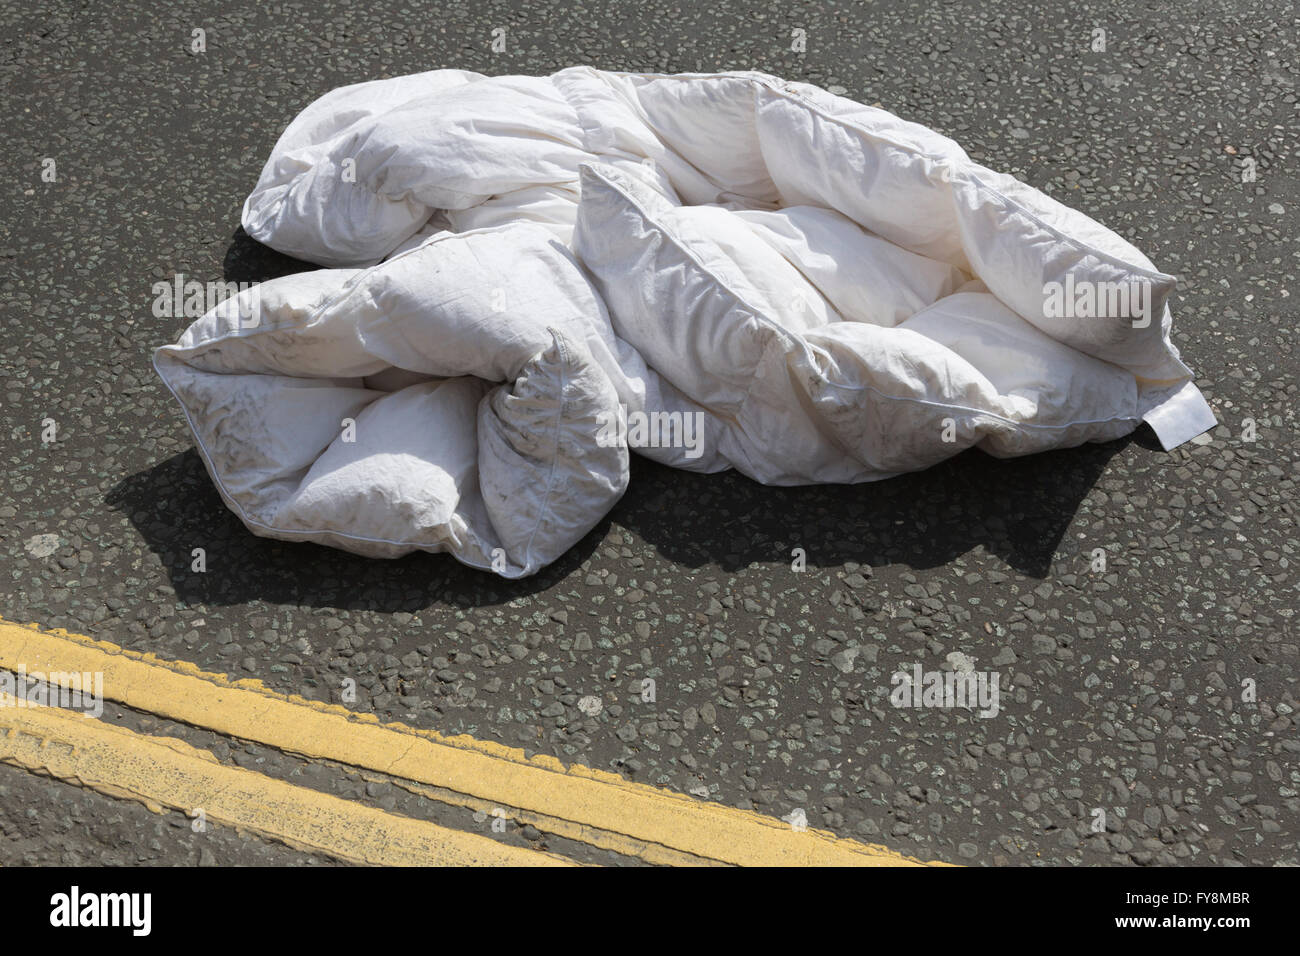 Duvet lying in a street, symbolic image for homelessness, sleeping rough, having no home, living in the street, London, UK Stock Photo